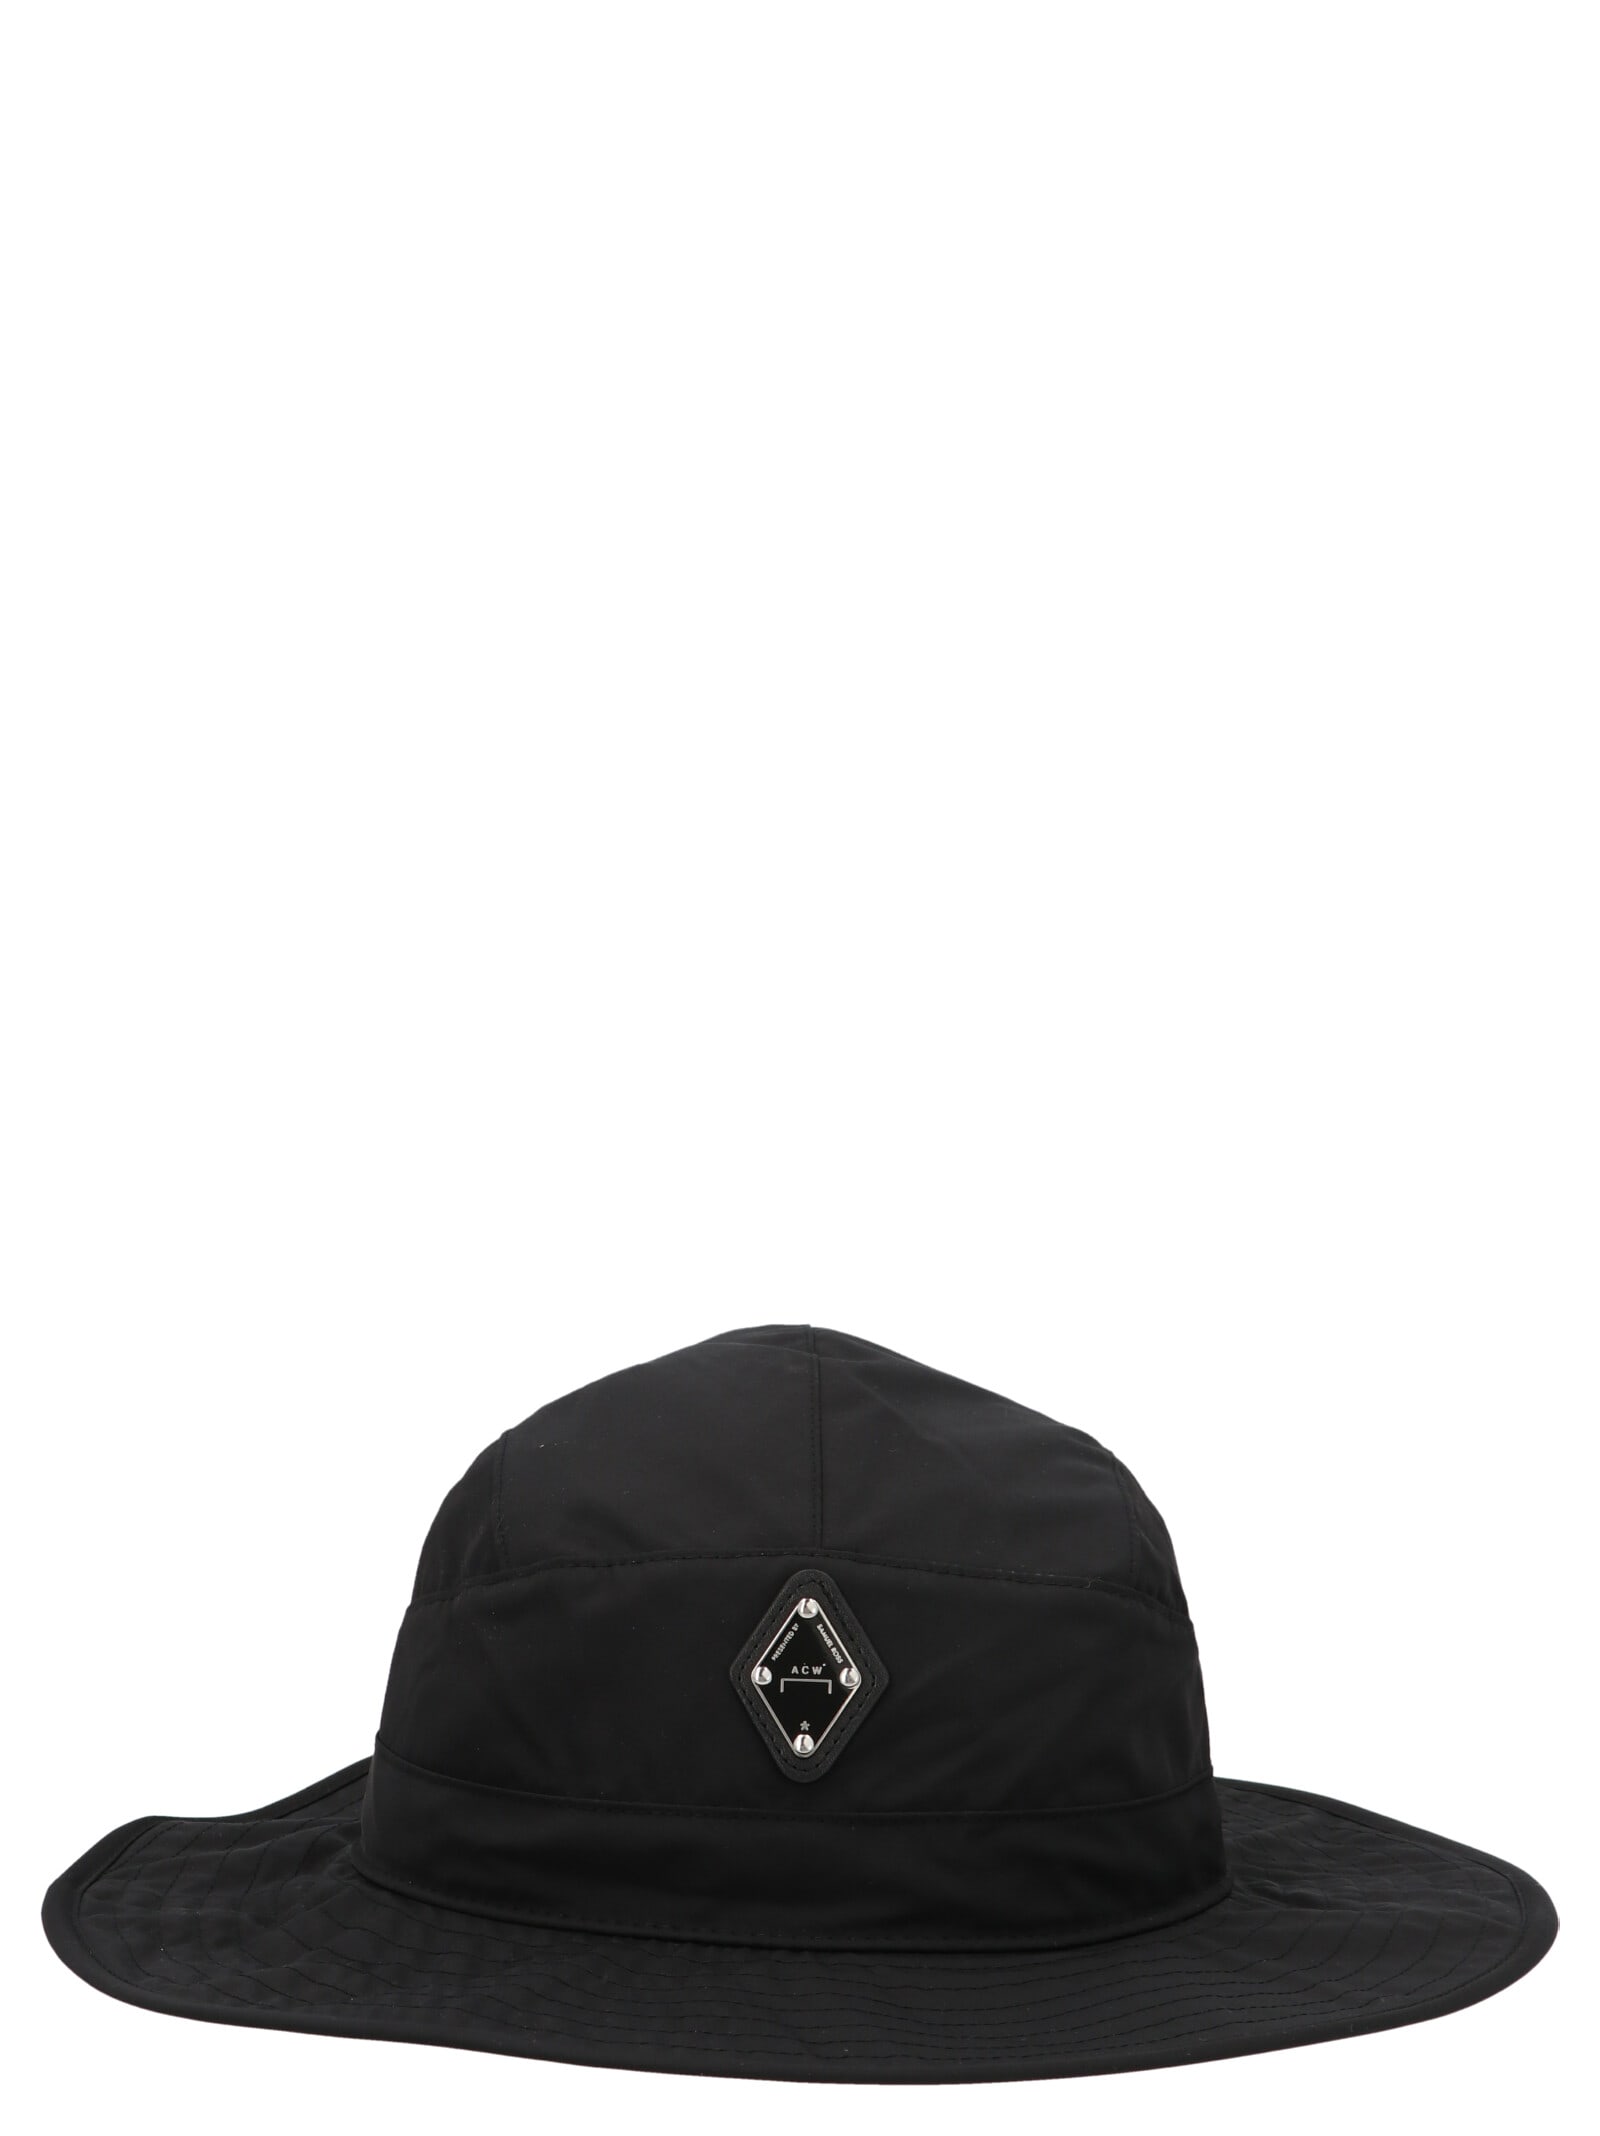 A-cold-wall ripple Bucket Hat